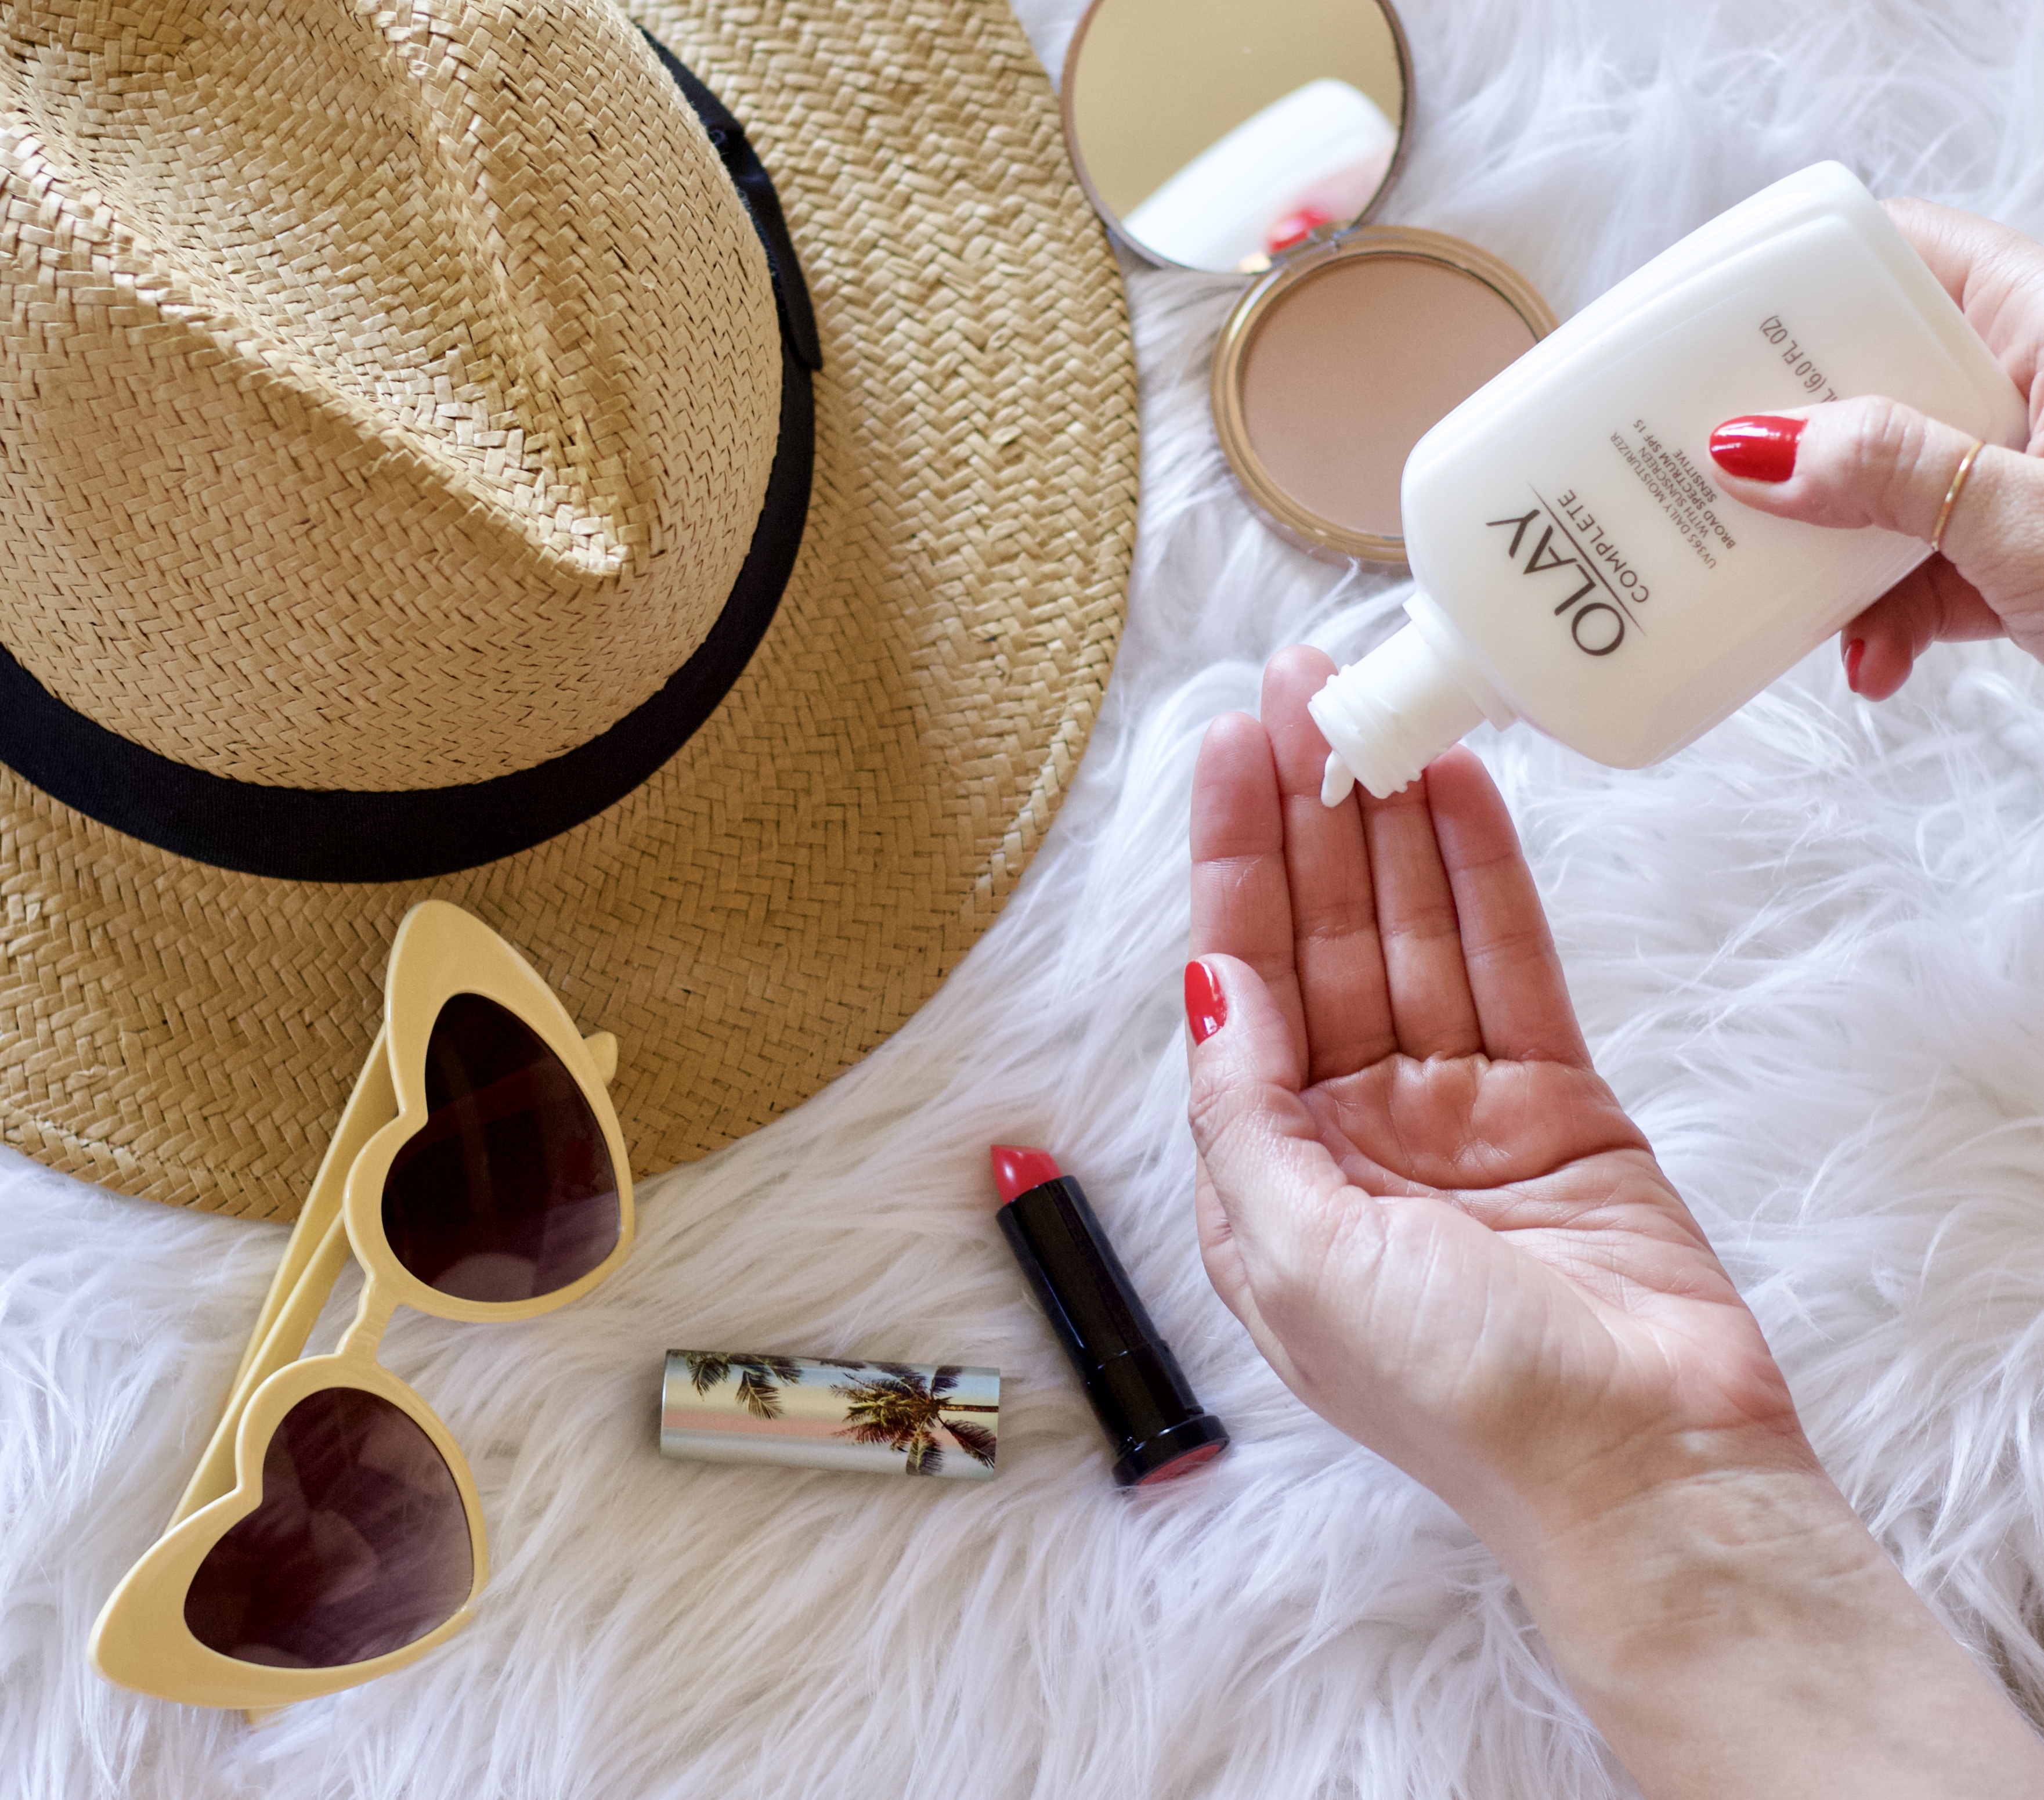 protect your skin for summer olay moisturizer #sunprotection #summerskincare #skincarefavorites